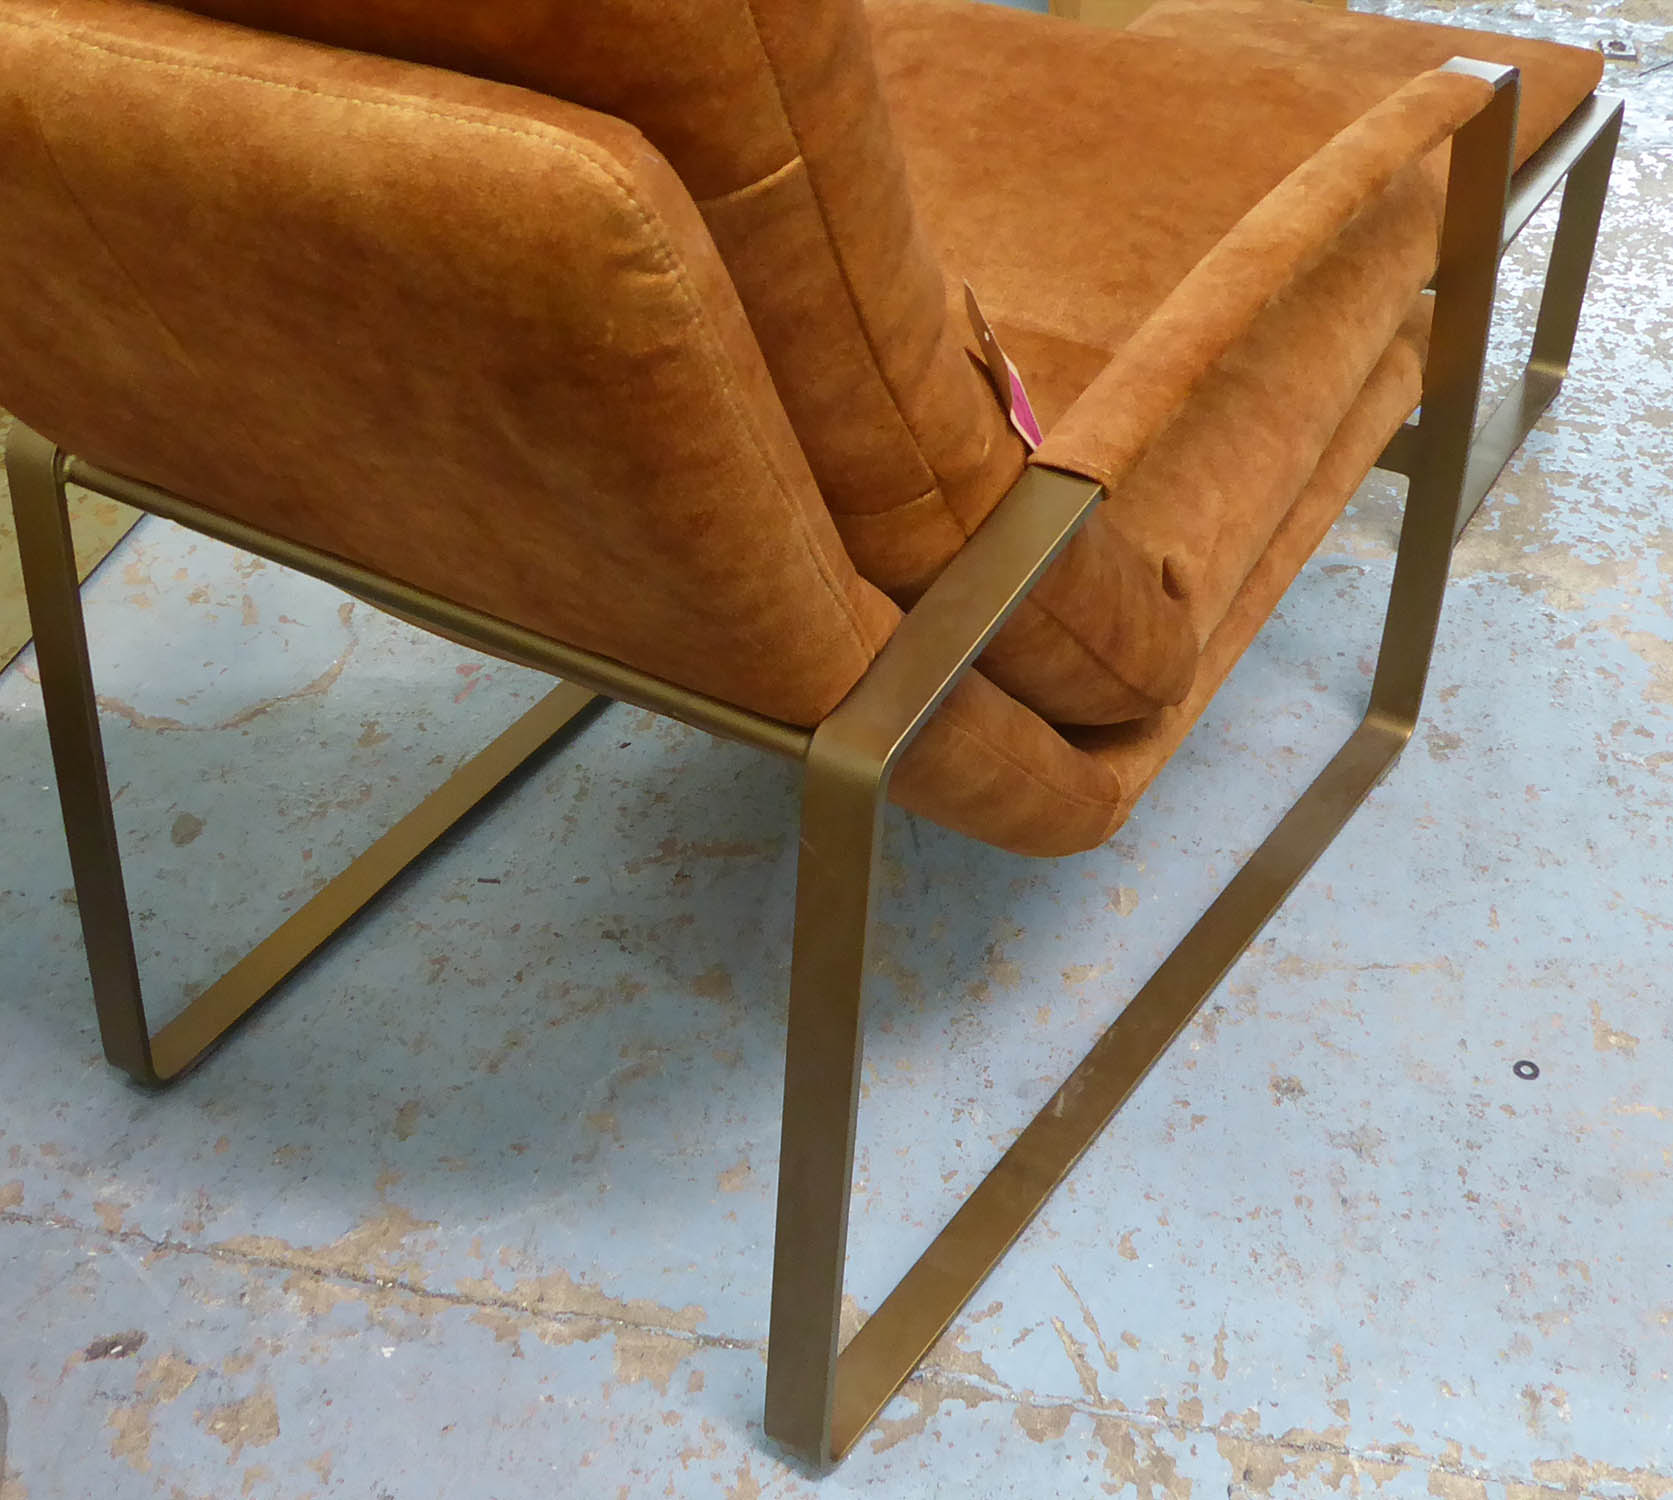 ARMCHAIR AND STOOL, 1970's Italian style bronzed metal with mustard upholstery, 65cm W X 94cm D x - Image 6 of 9